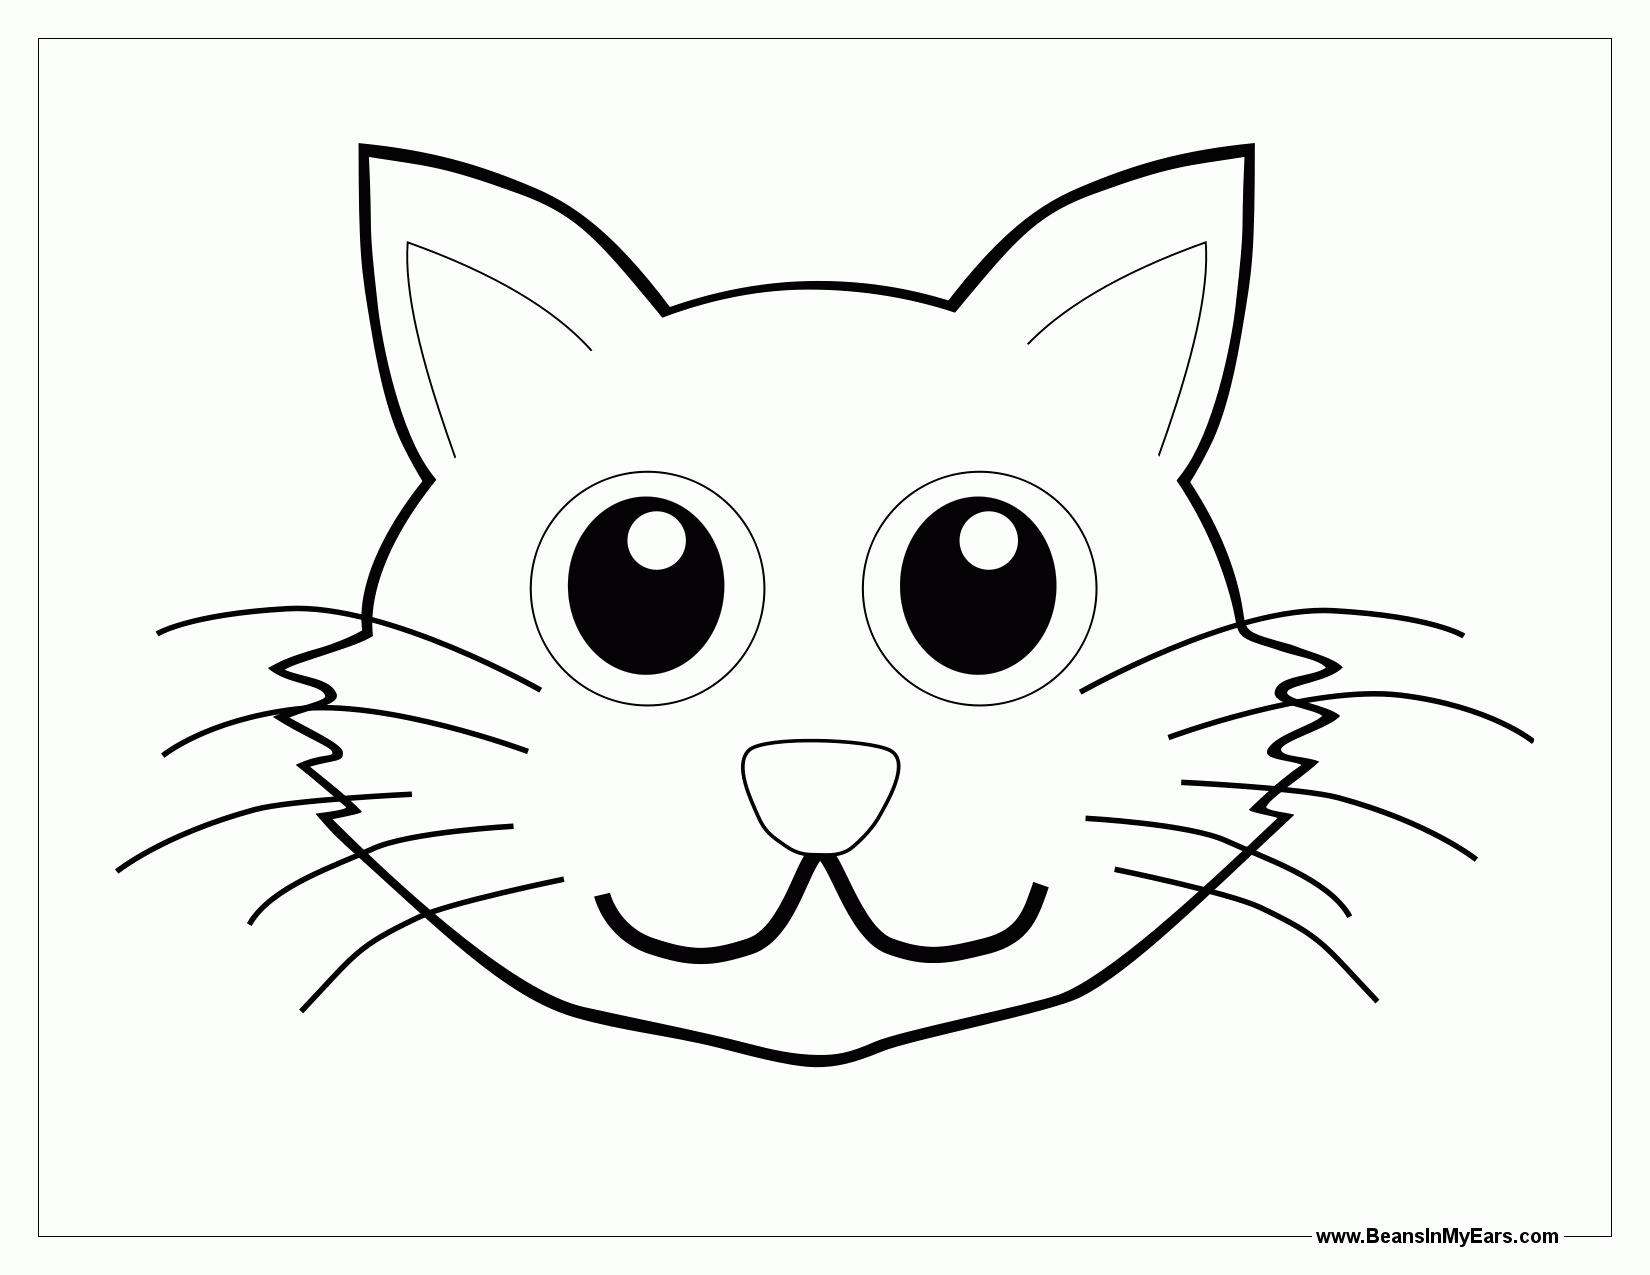 Kitten Outline Coloring Page - Coloring Home